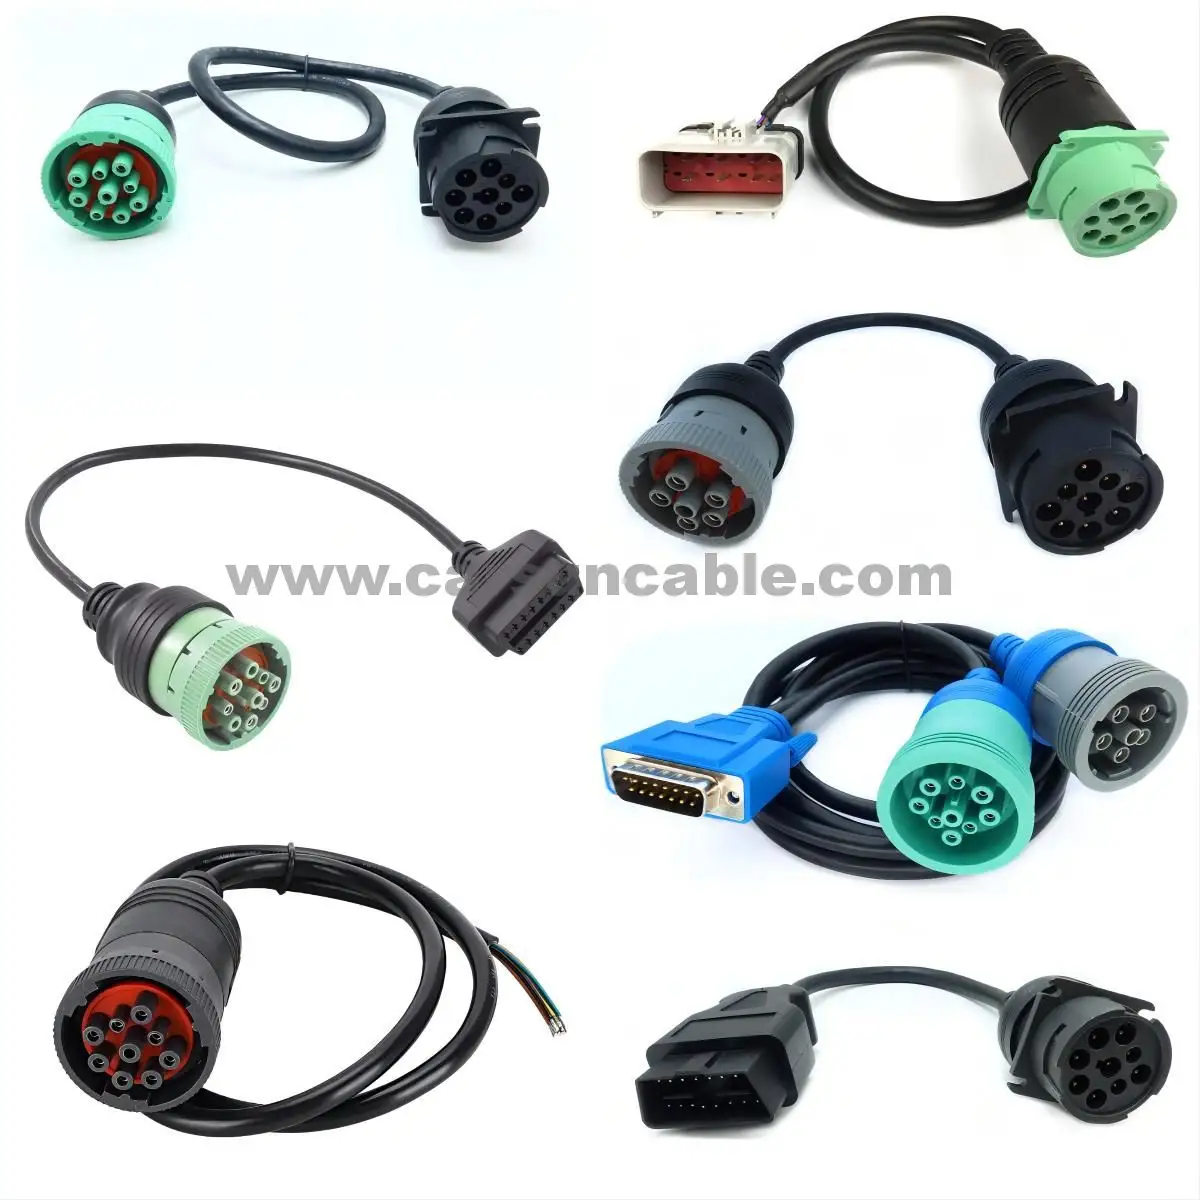 Factory Sale J1939 9 Pin To OBD 16 Pin CABLE J1939 To Obd2 Adapter Cable